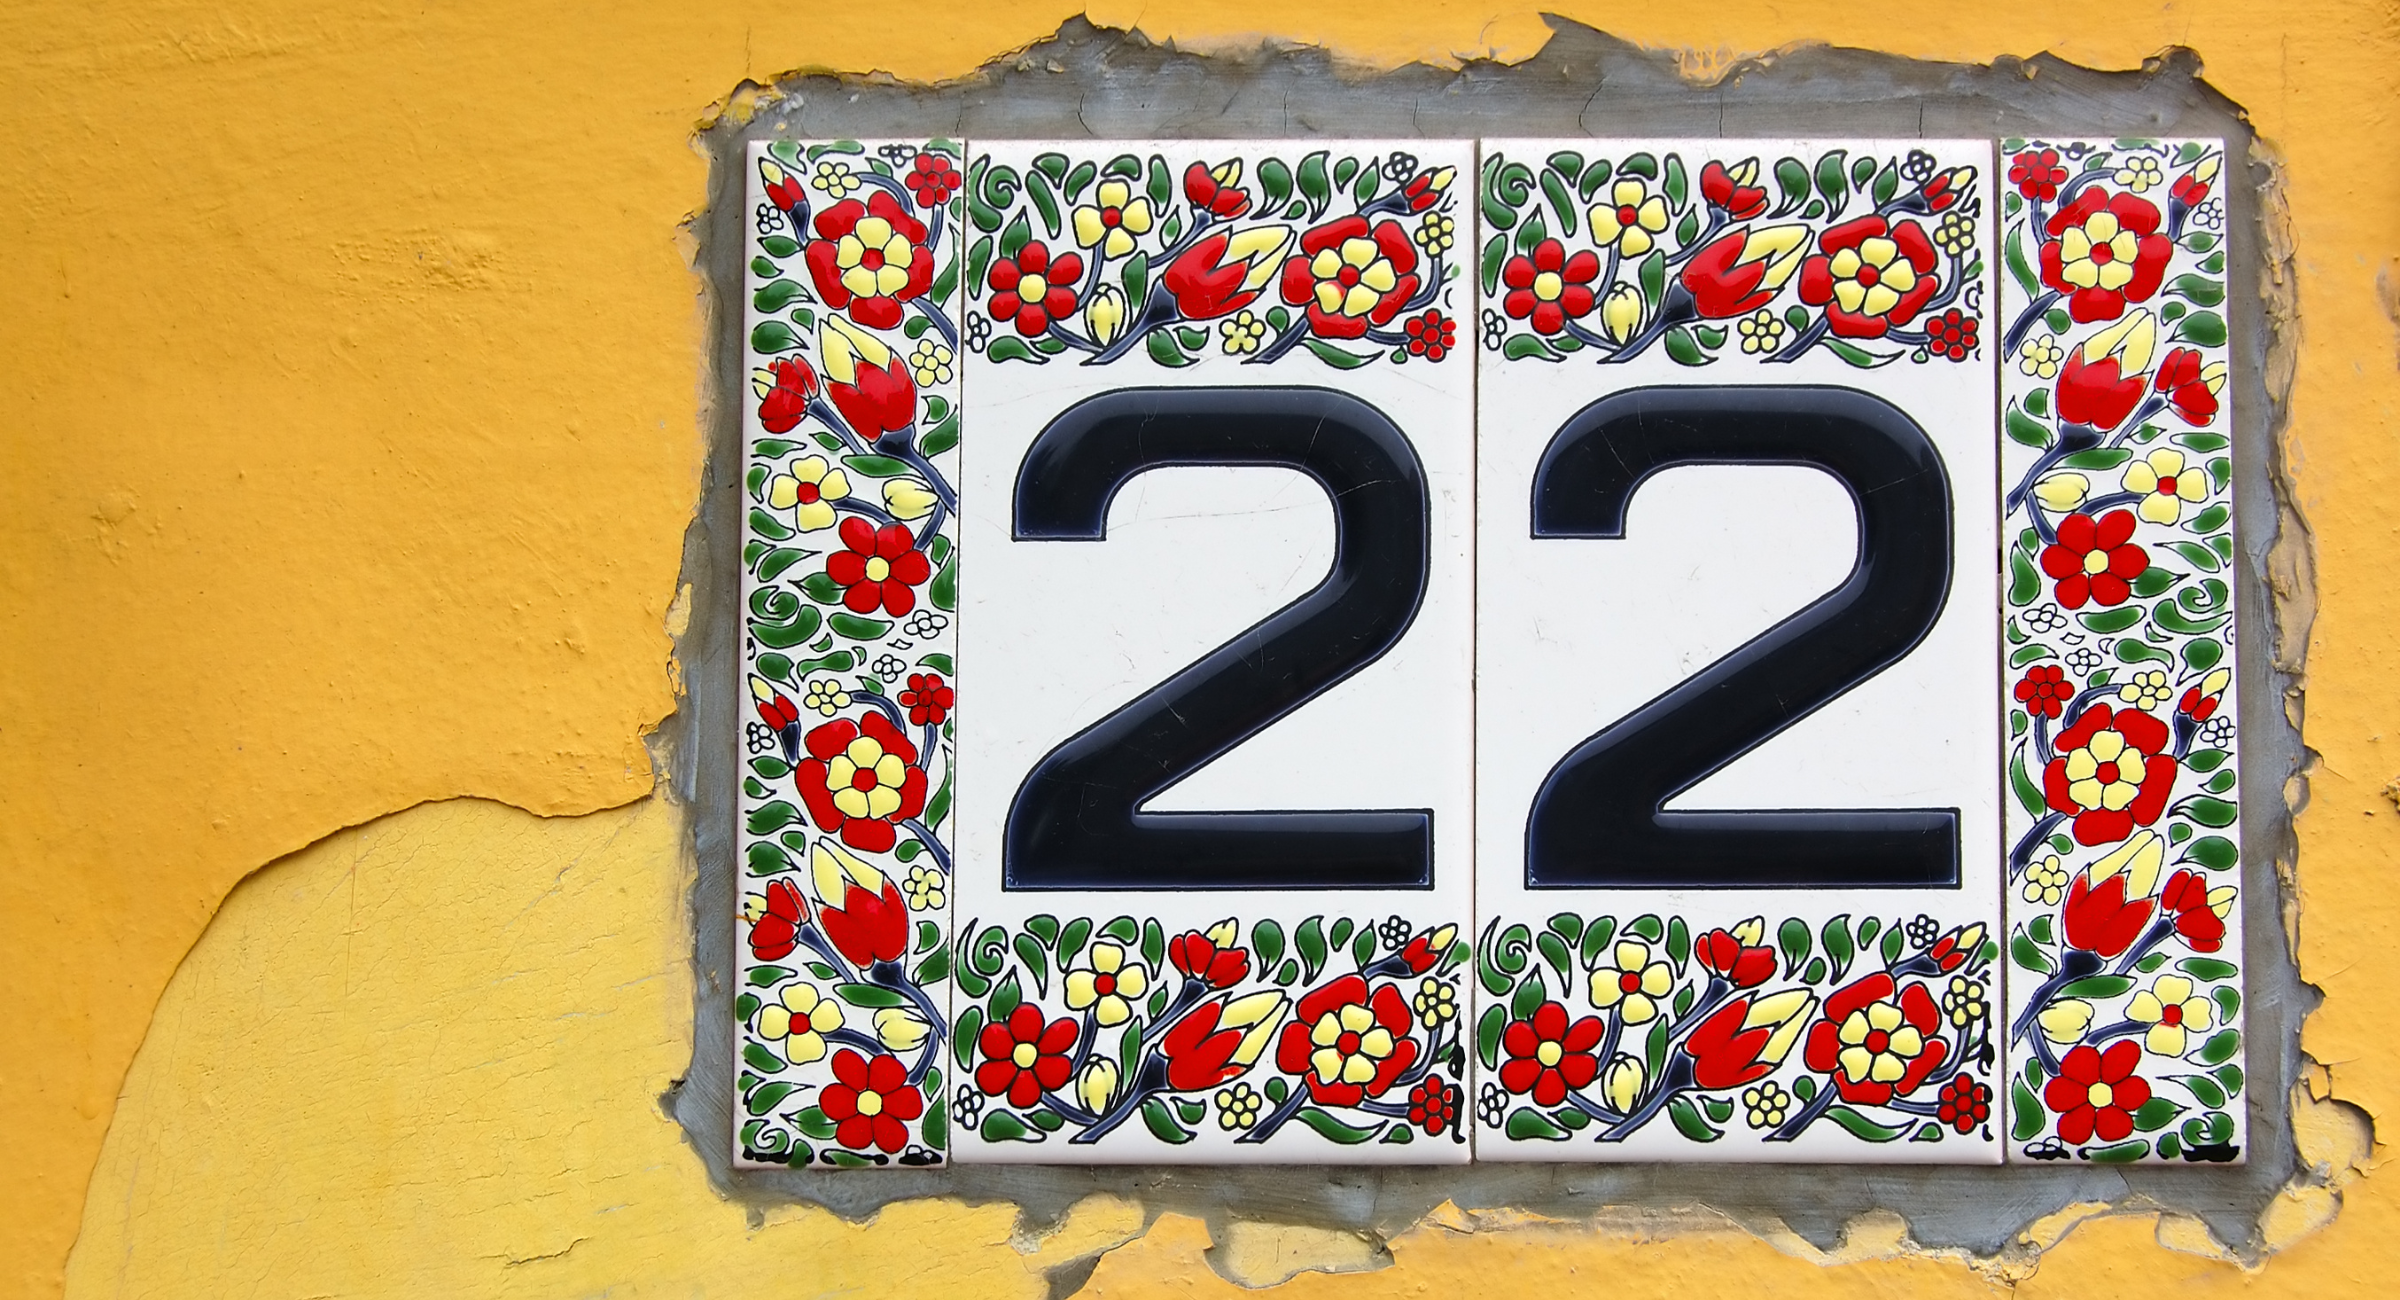 Tile with flower decorations and the number 22